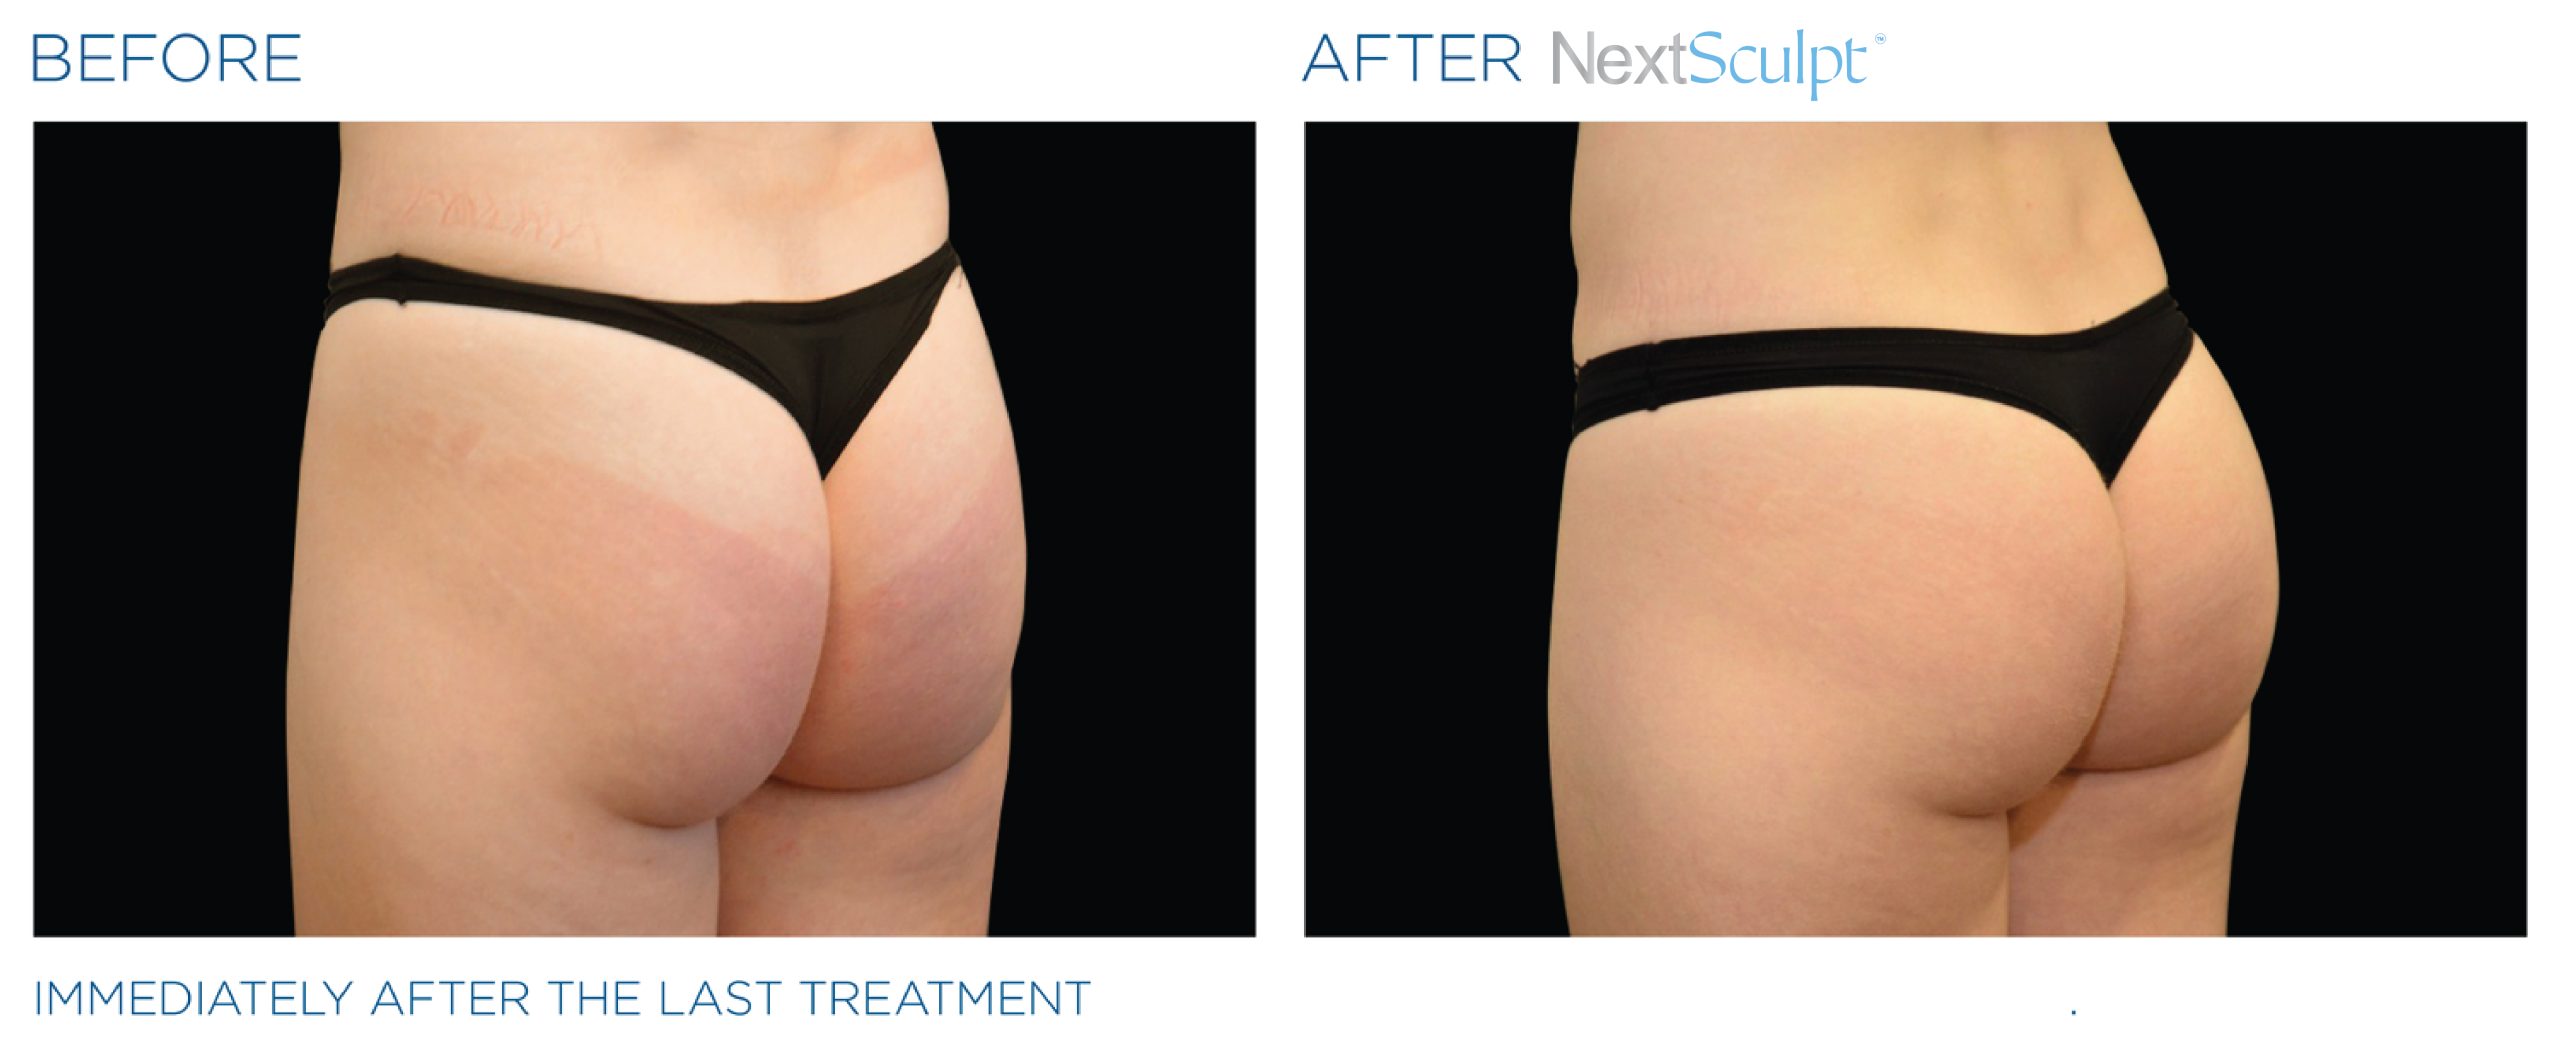 nextsculpt-before-after-11-scaled.jpg